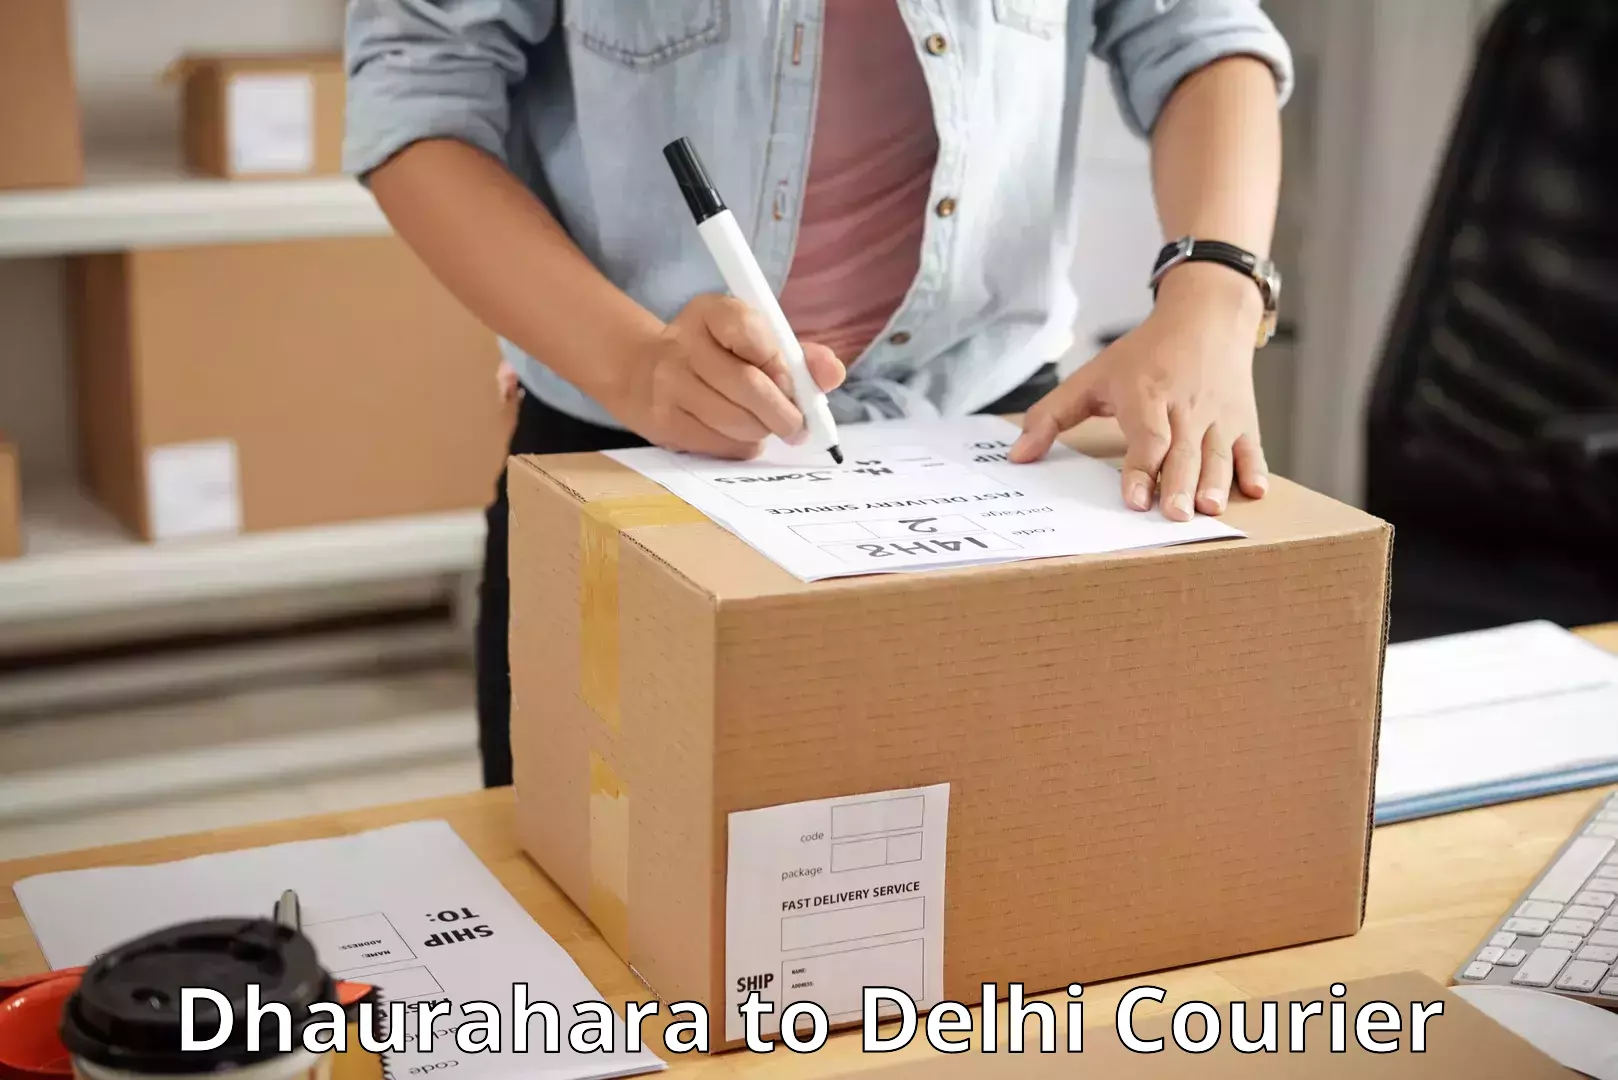 Expedited parcel delivery in Dhaurahara to Jawaharlal Nehru University New Delhi